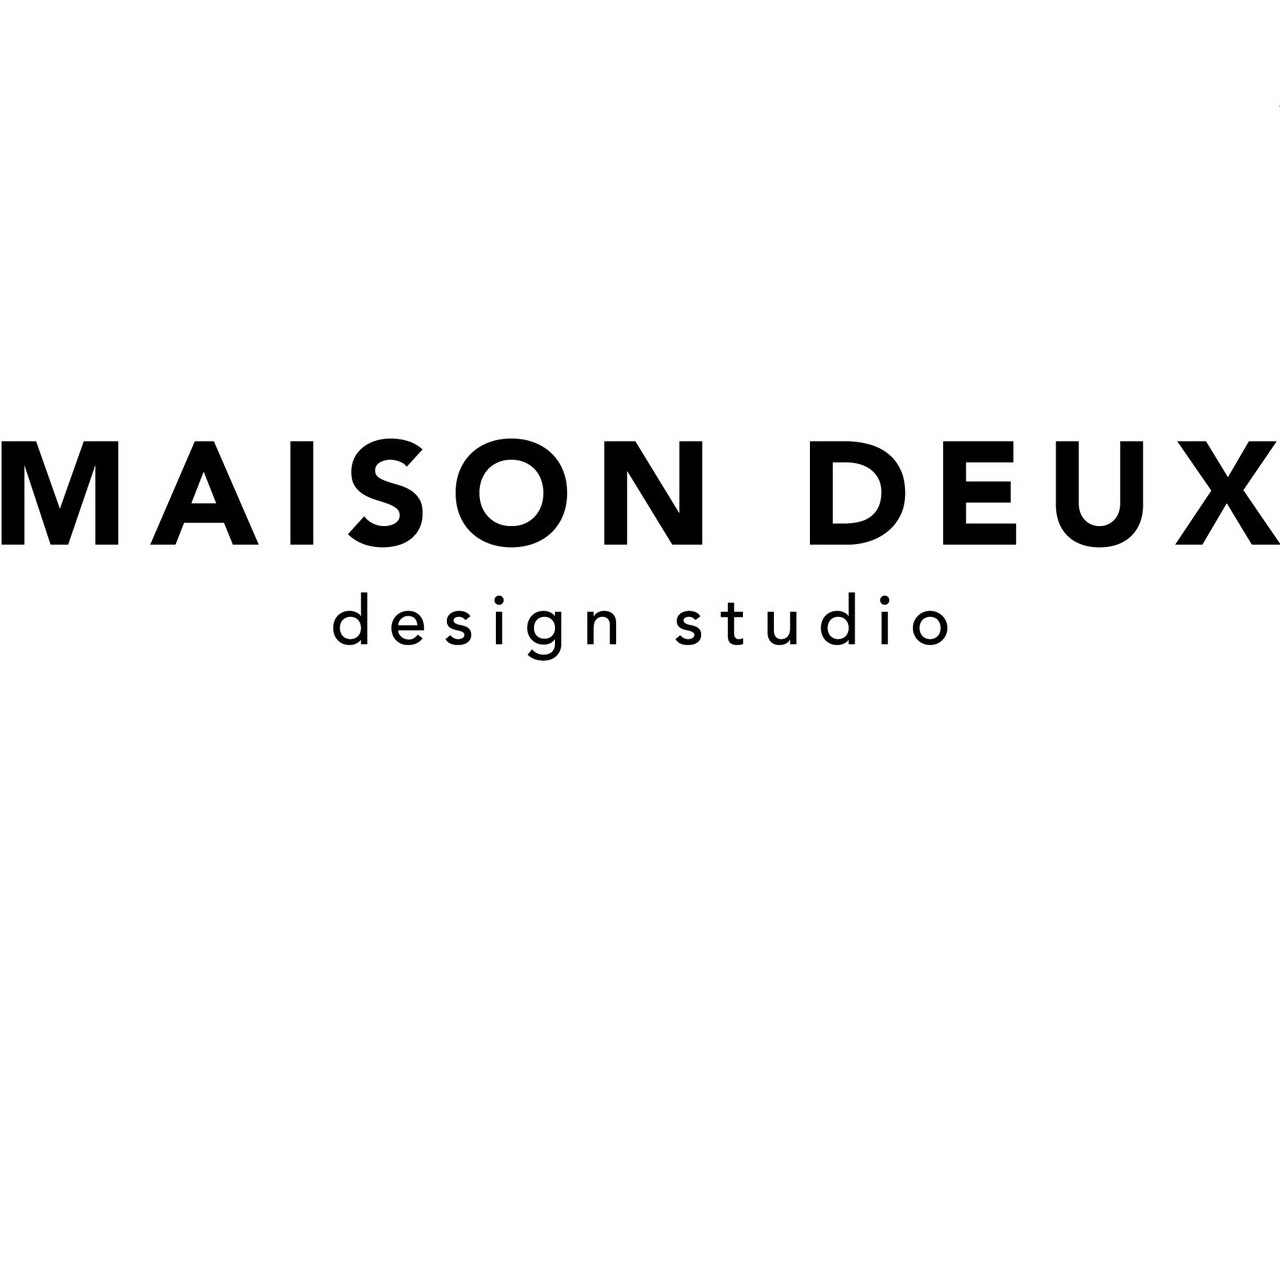 Maison Deux, Mr Jasper Says As Seen In The Block